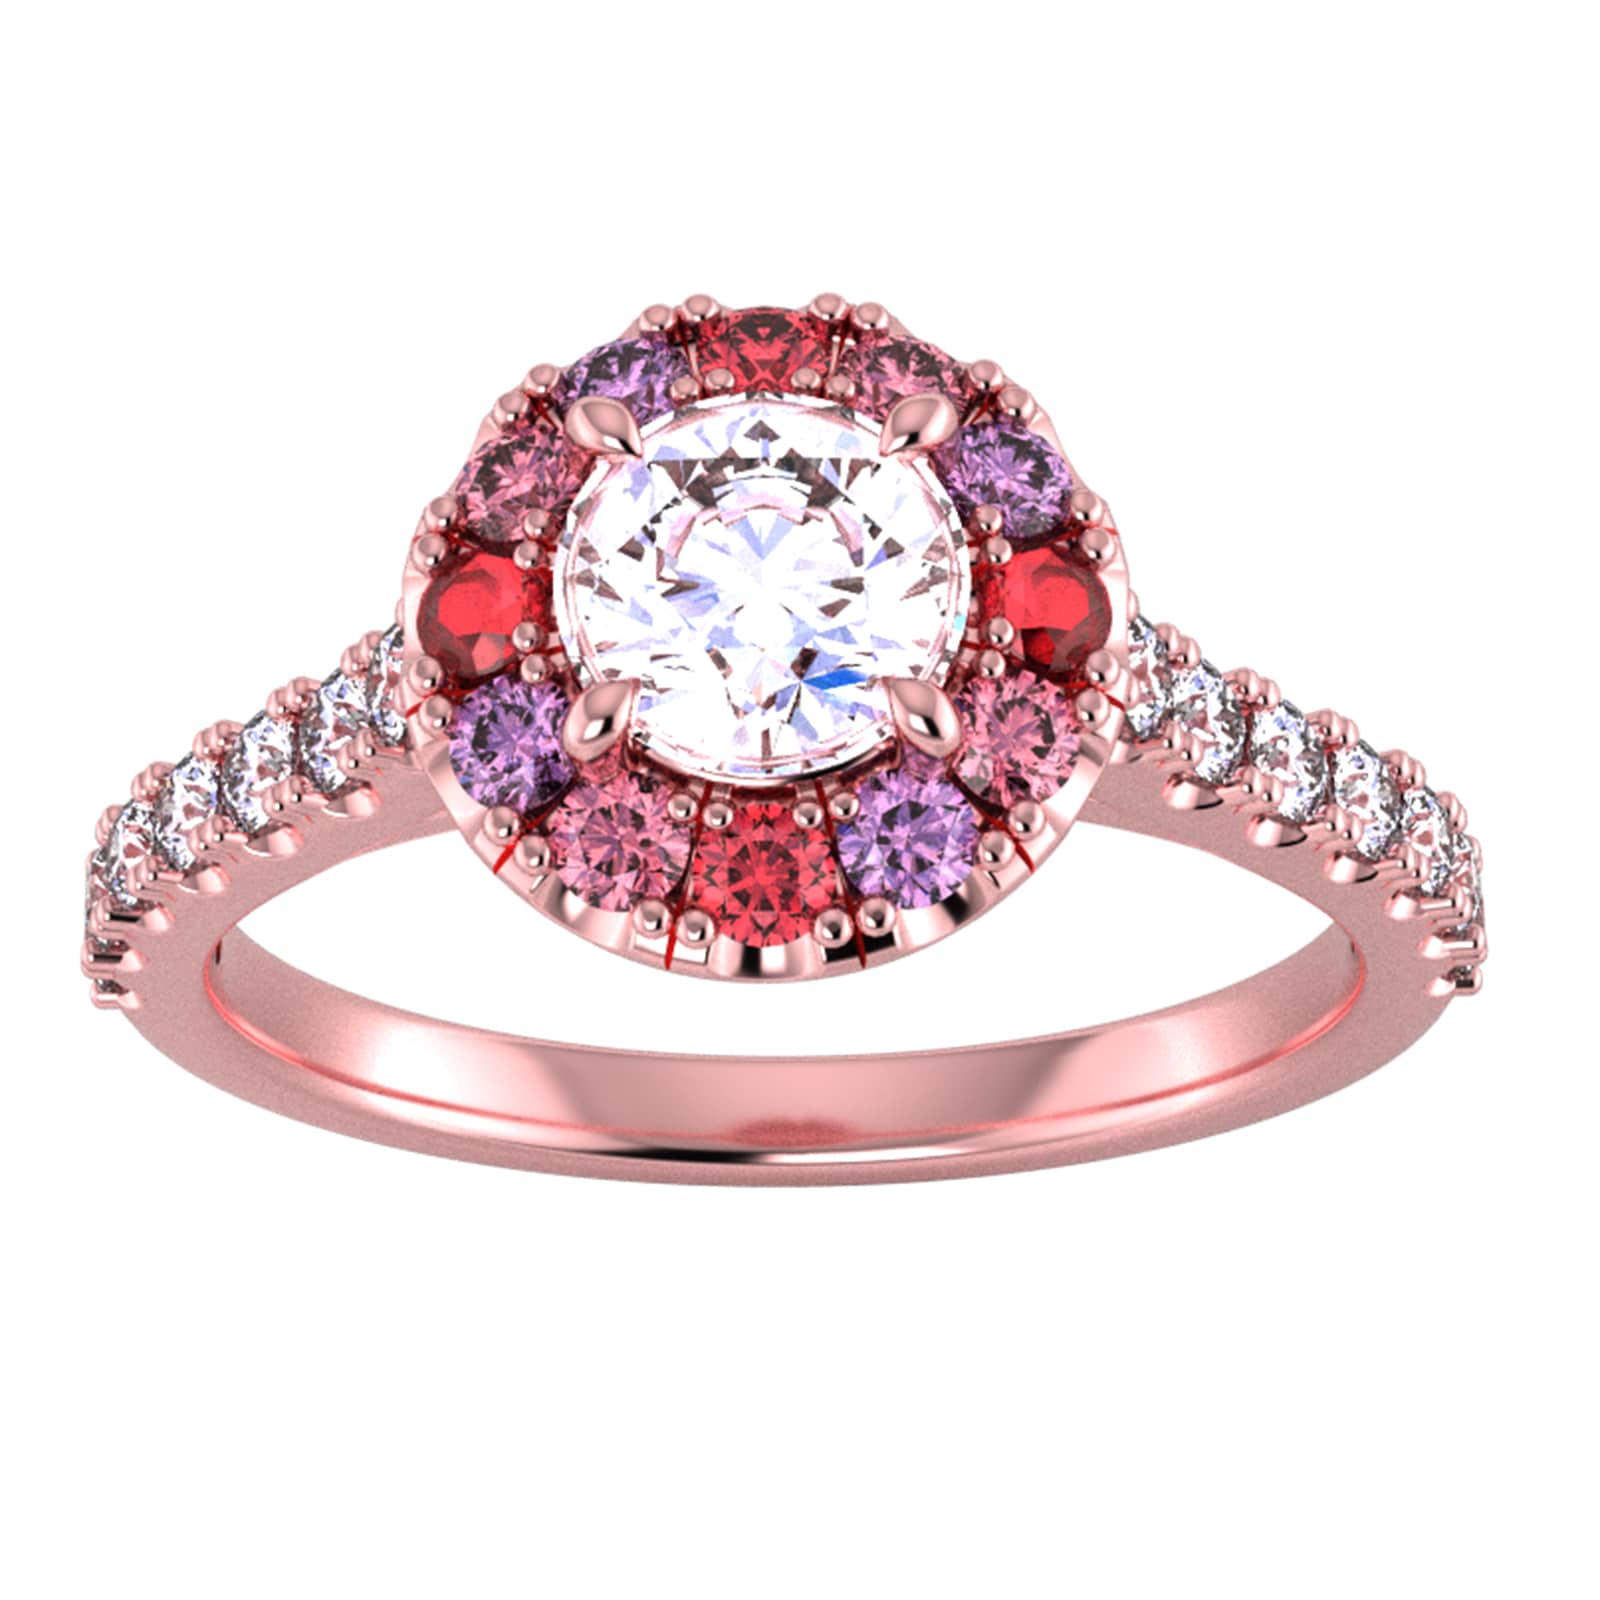 9ct Rose Gold Diamond & Pink, Red, Purple Sapphire Halo Ring - Ring Size H